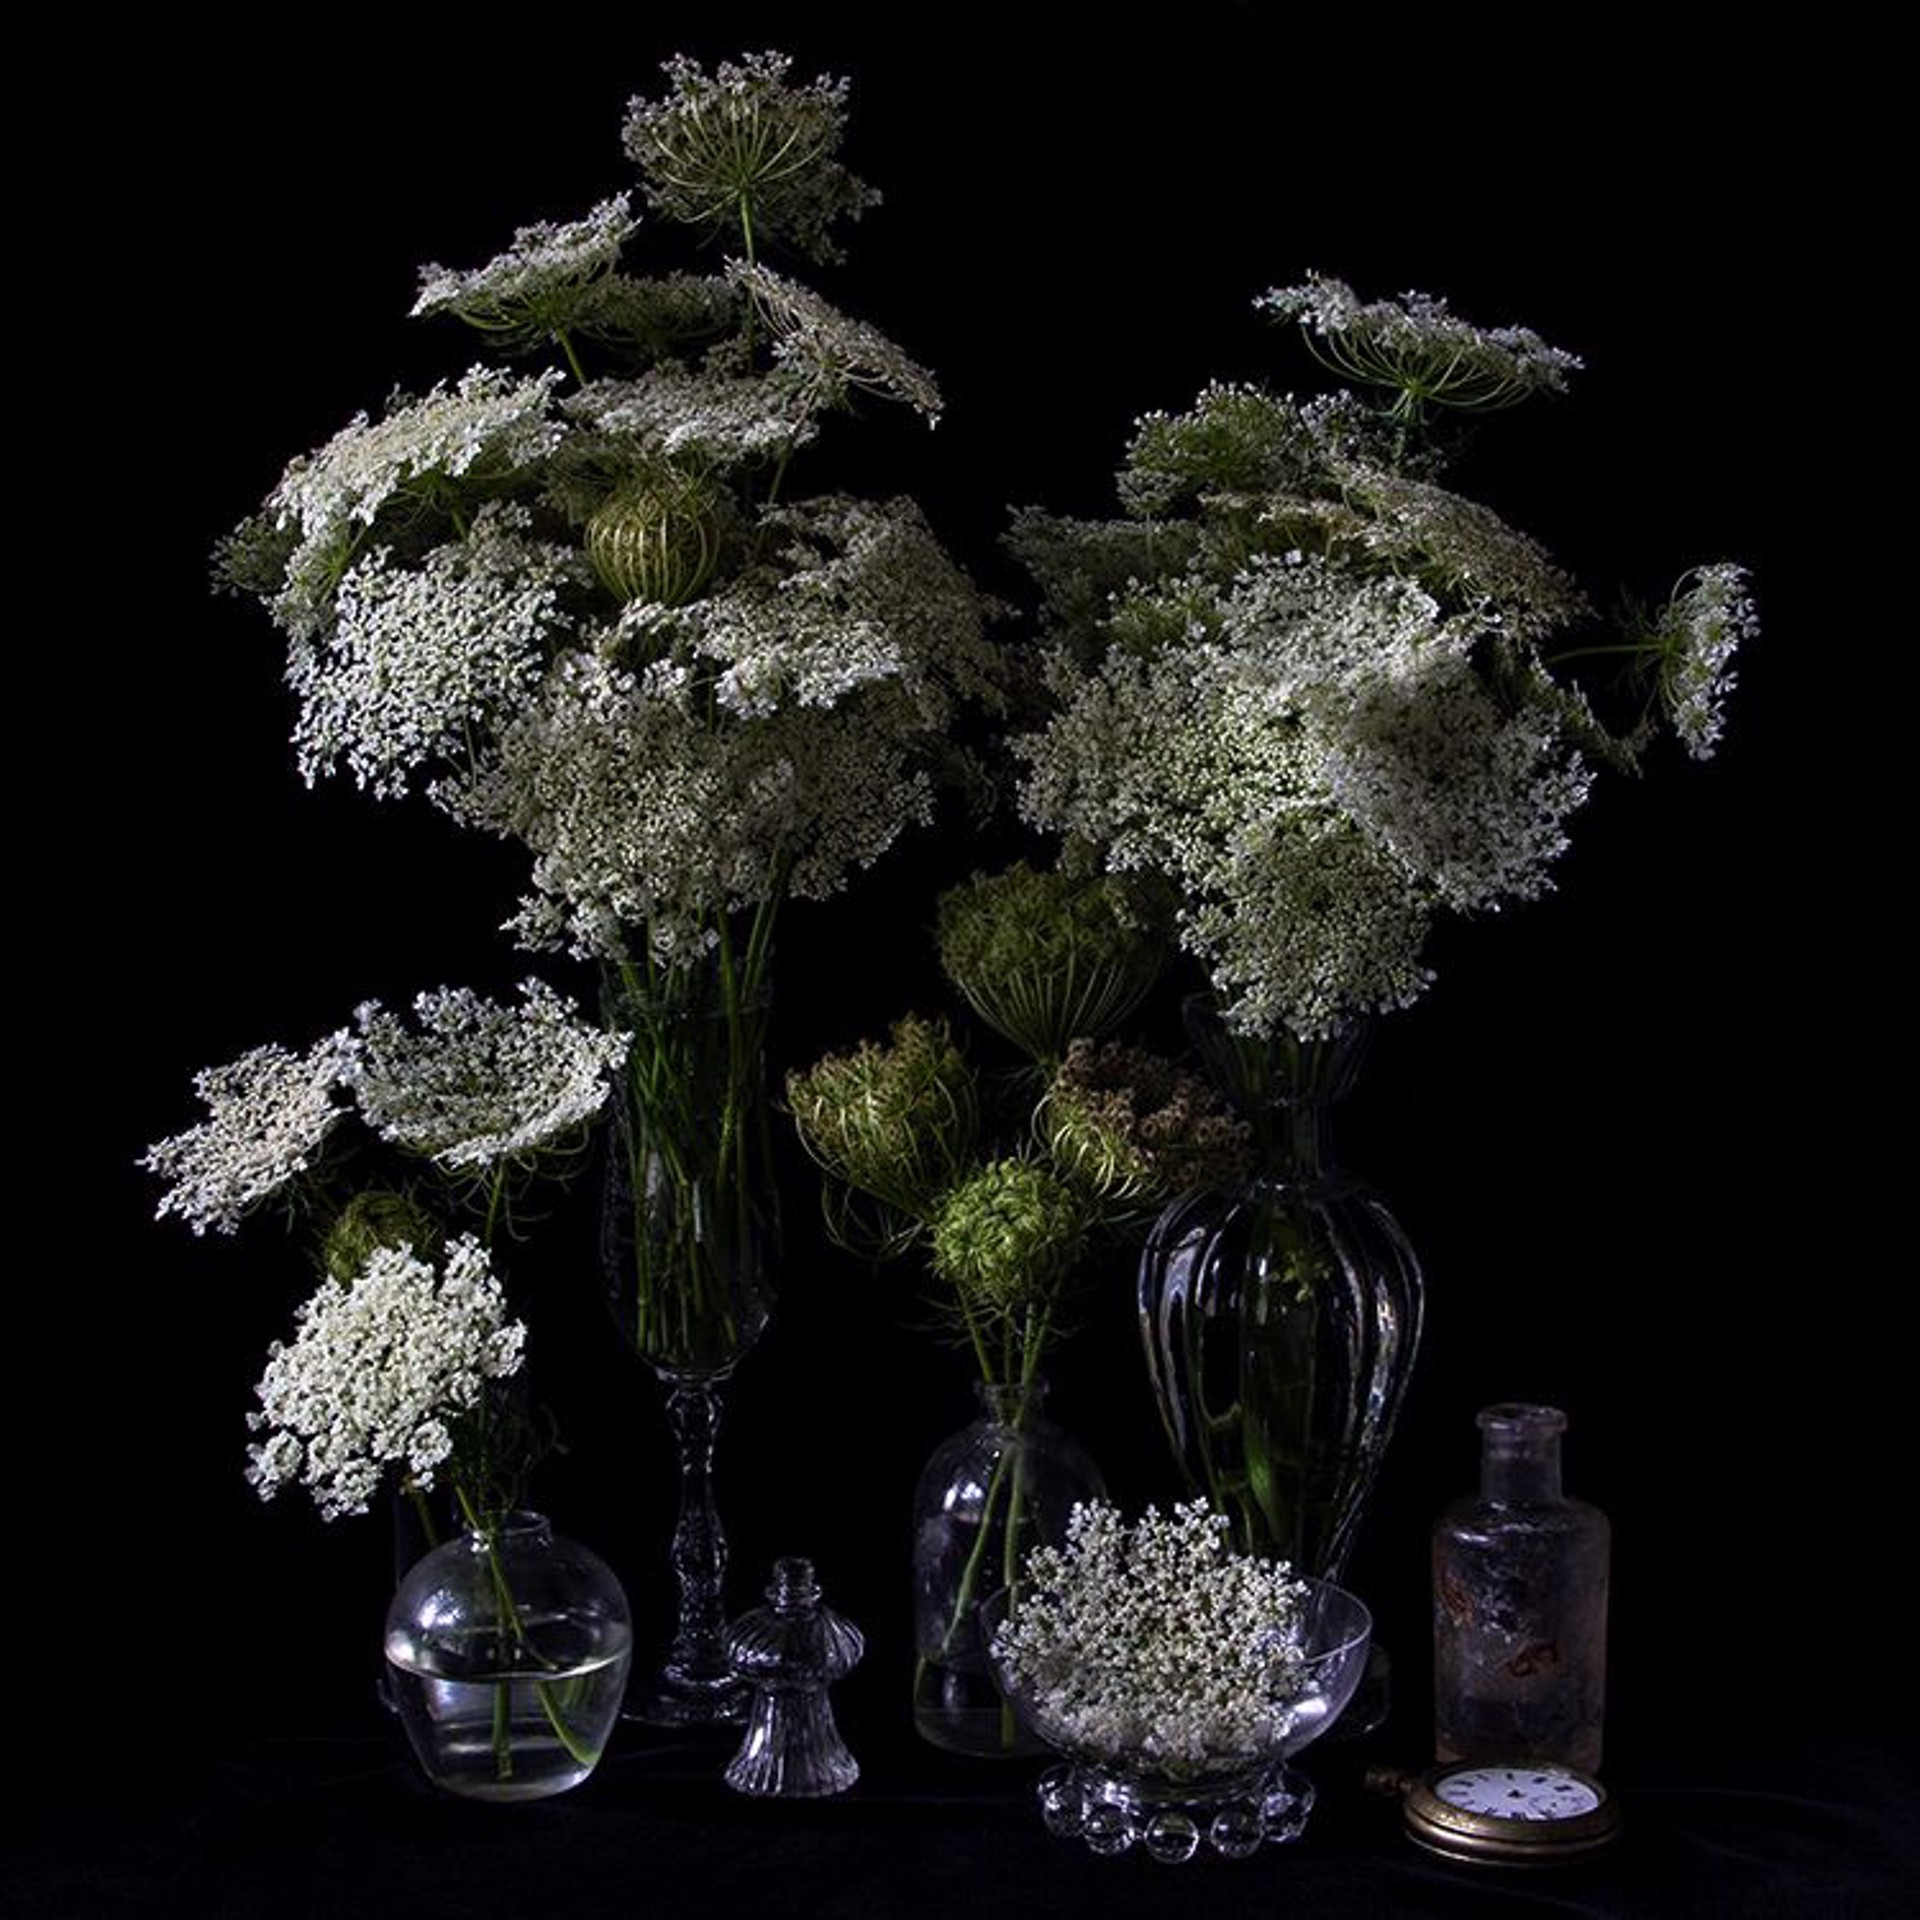 Queen Anne Lace, 9932 by Molly Wood